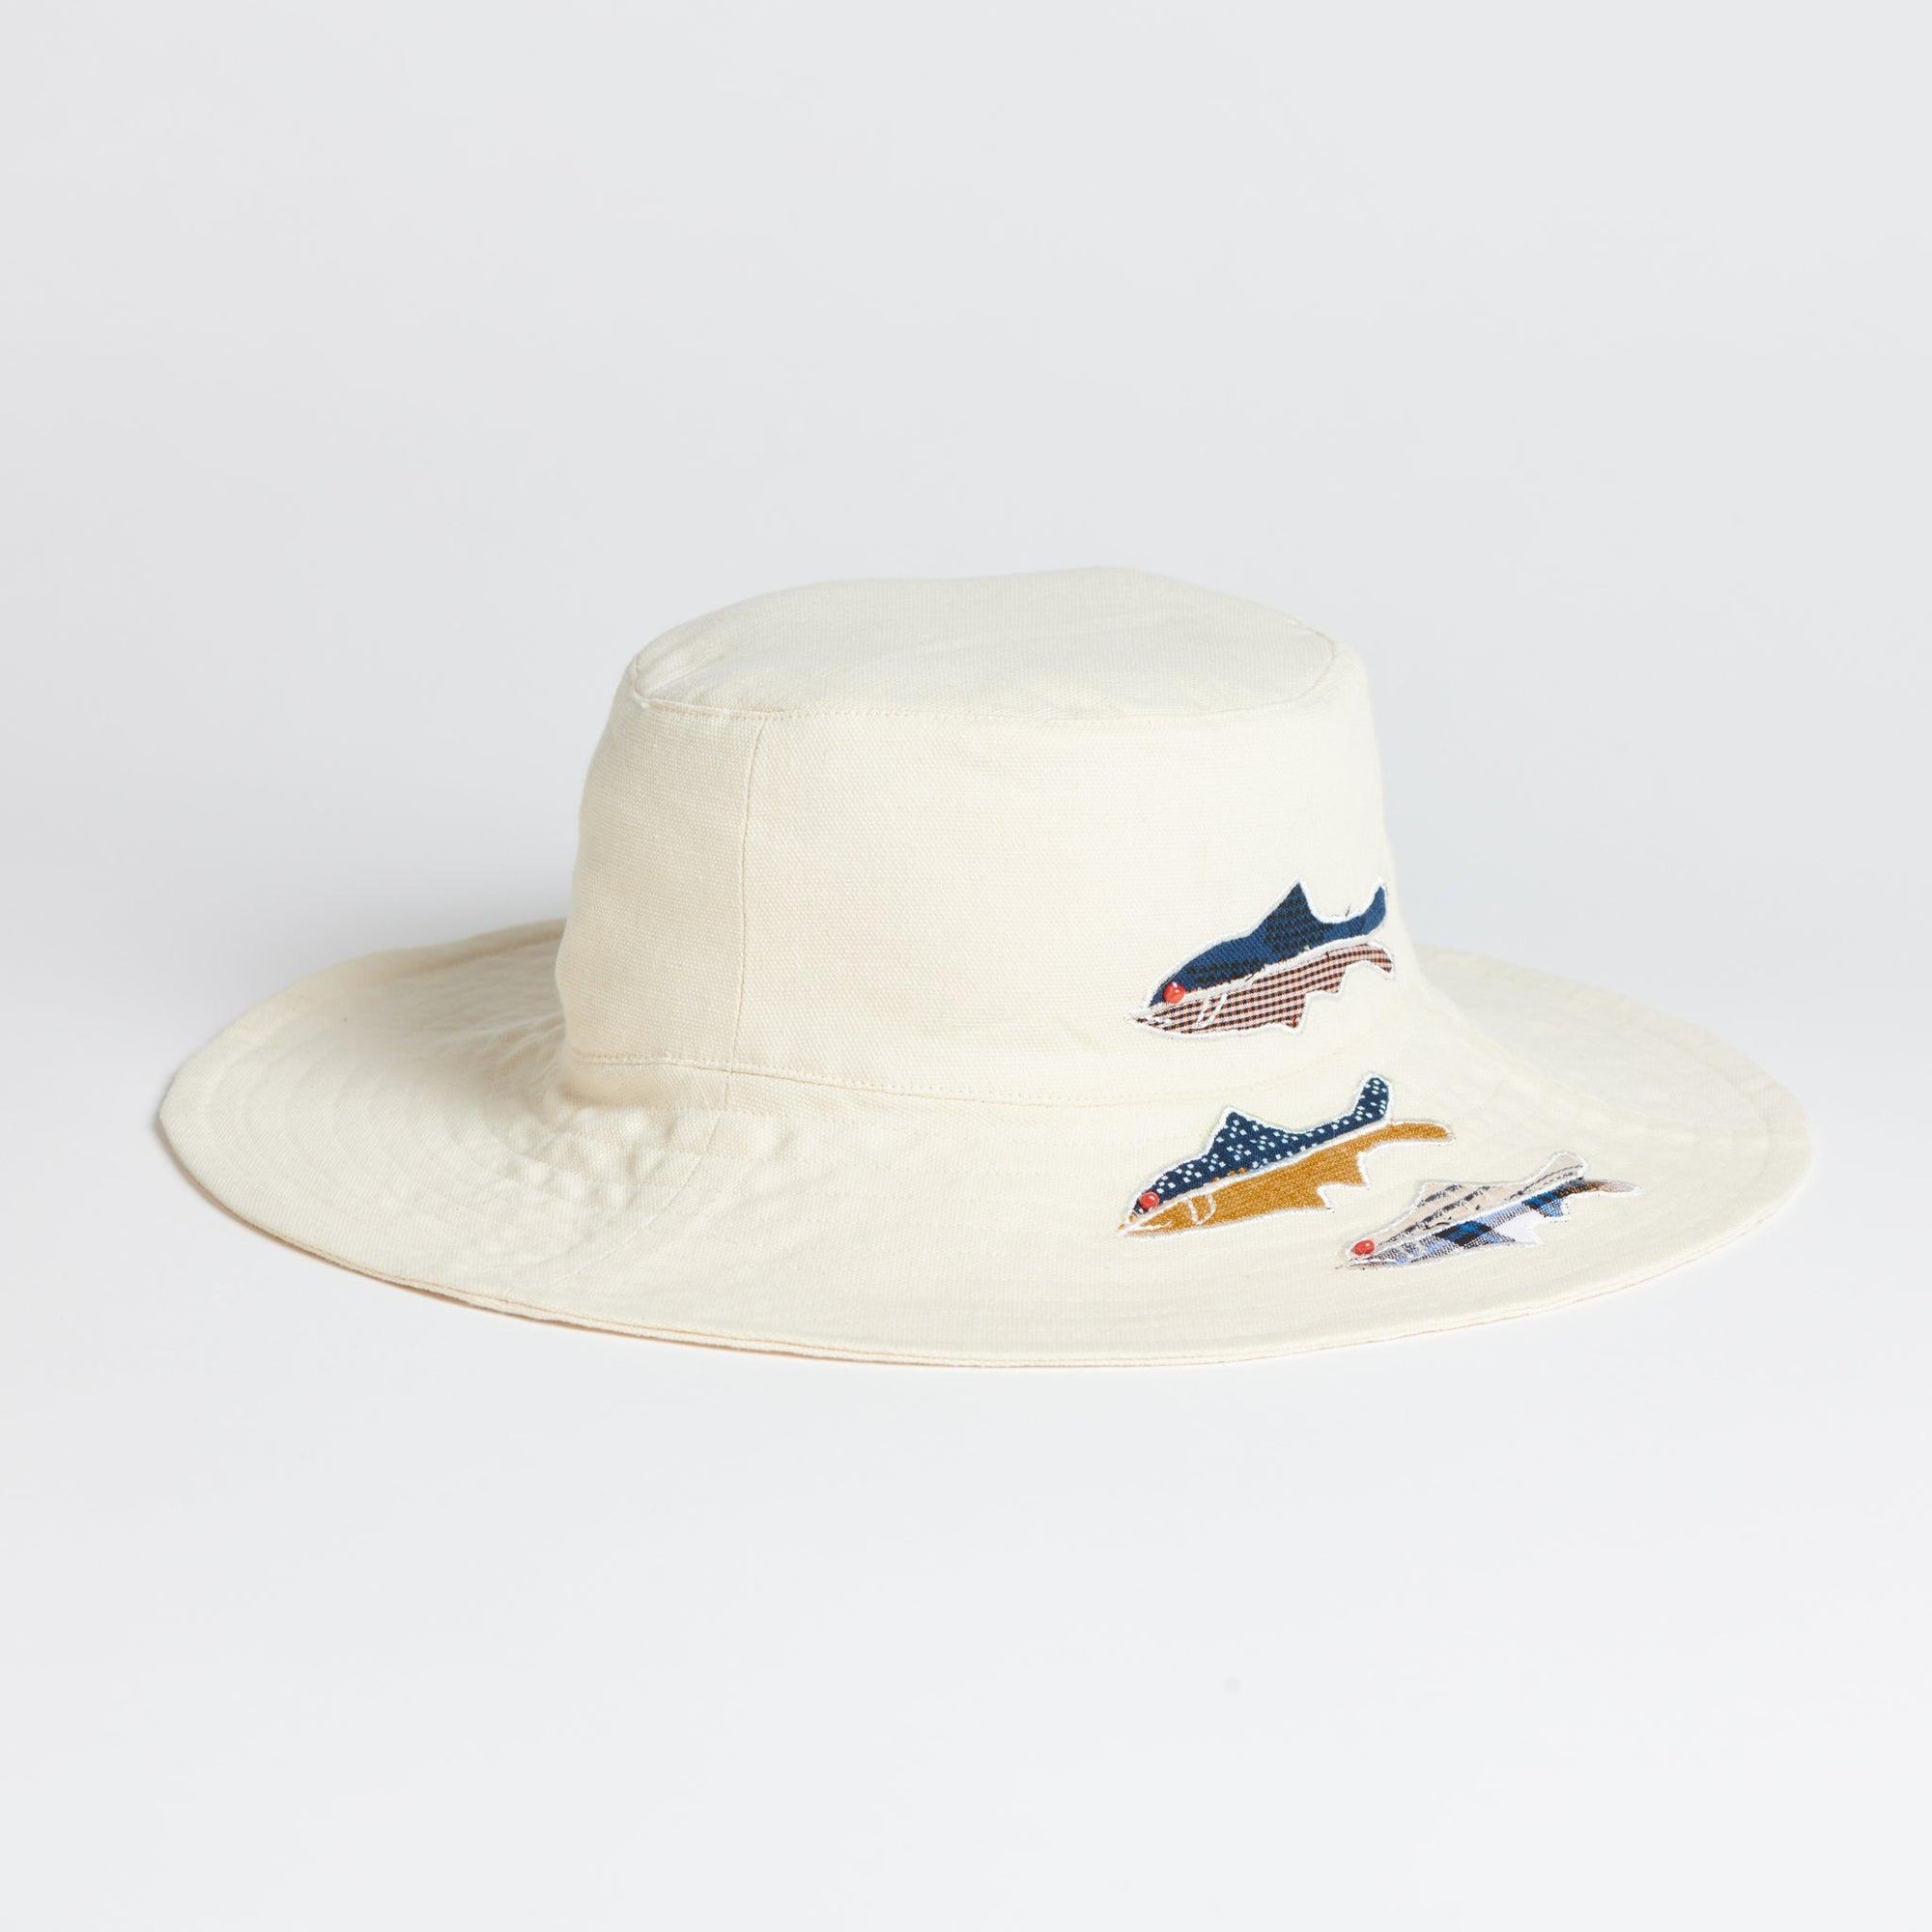 White Sun hat on white background. 3 Fish are appliqued in patterned remnant fabrics. 